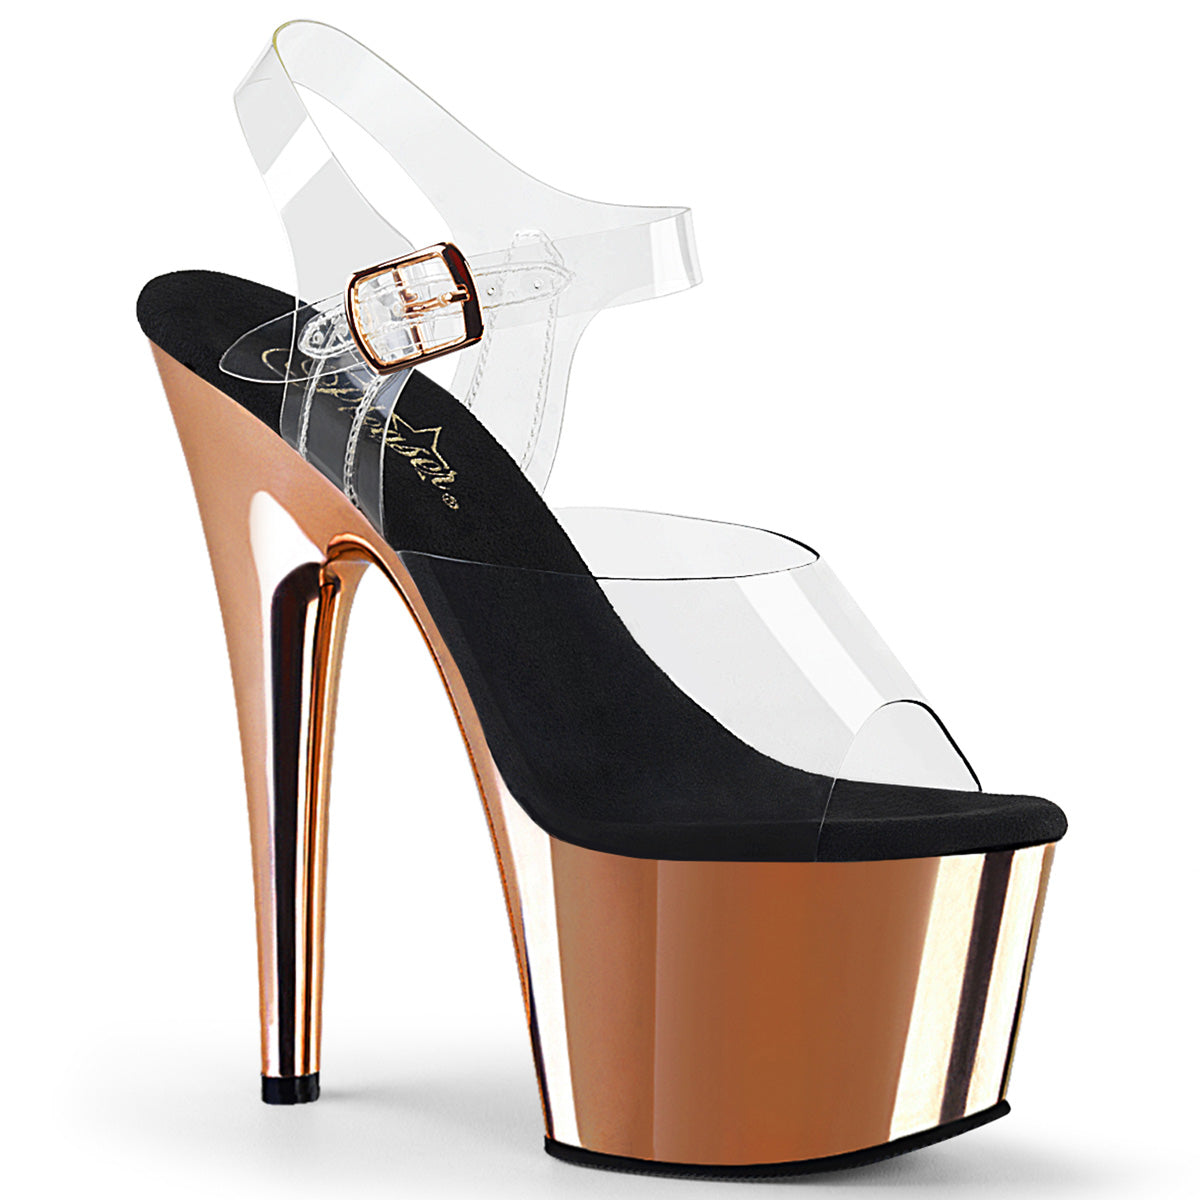 ADORE-708/C/ROGLDCH 7" PLEASER FAST DELIVERY 24-48h